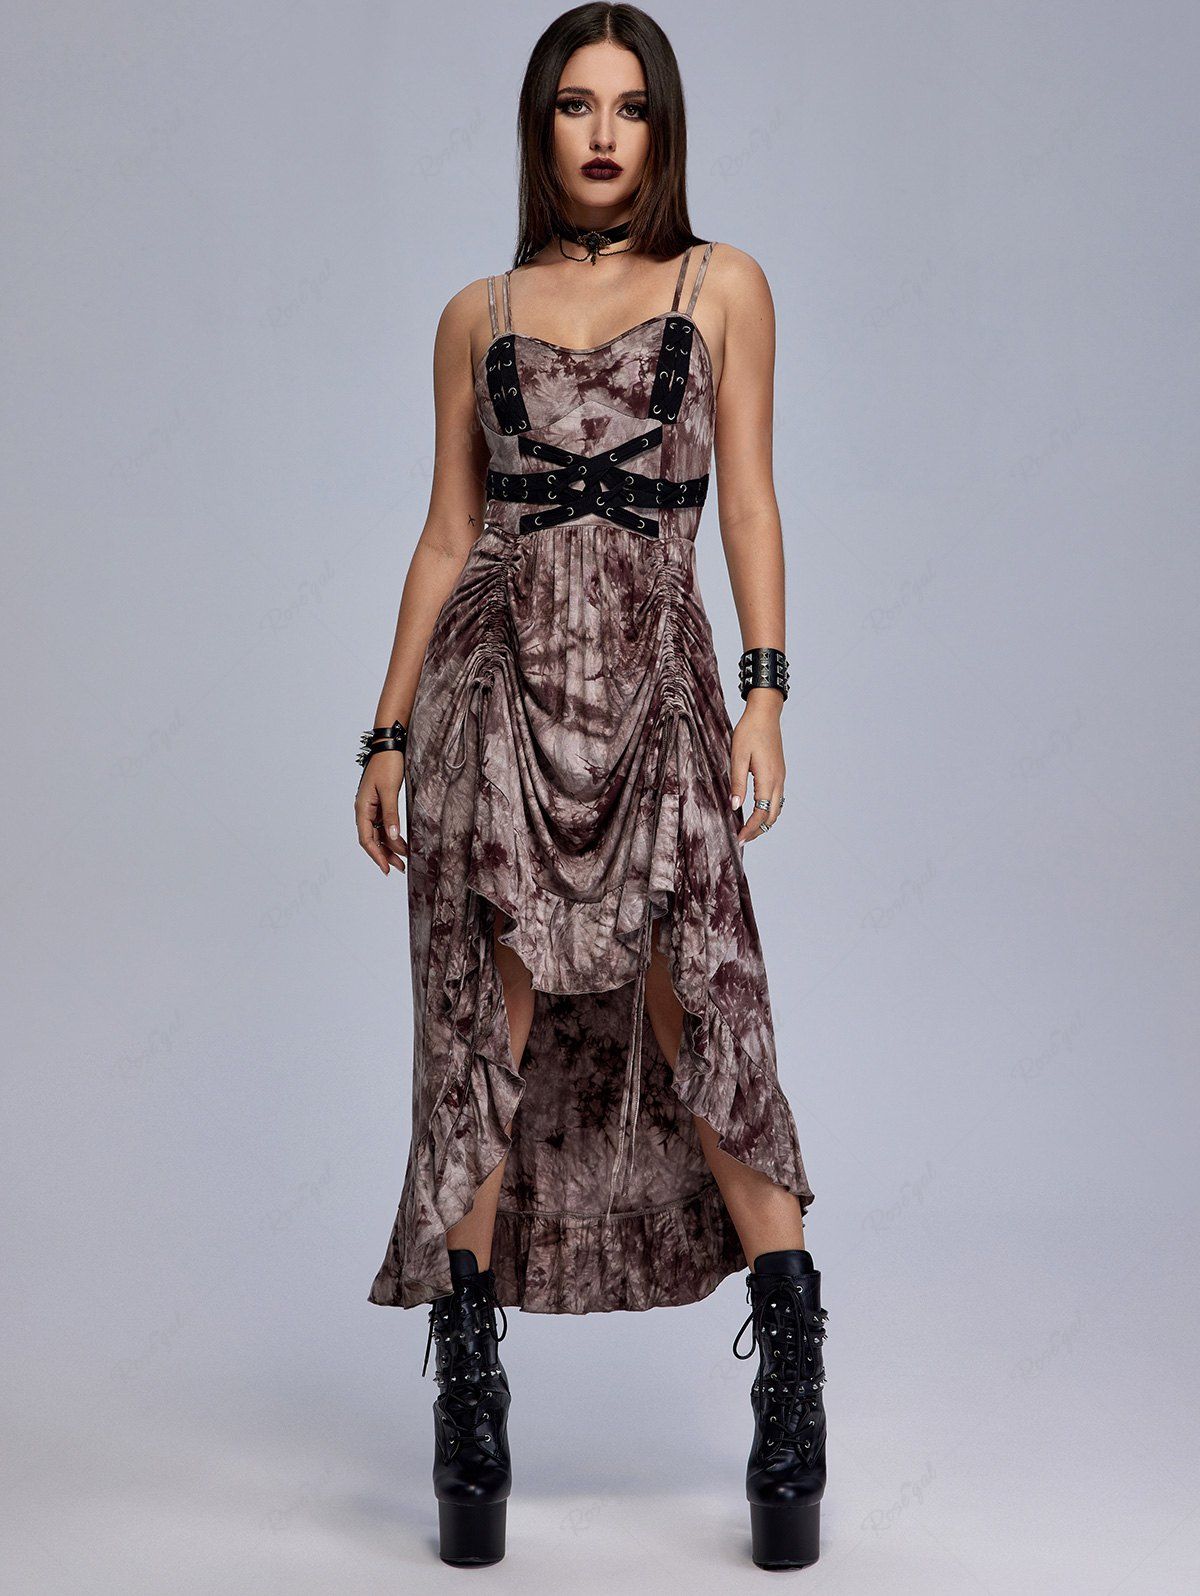 Trendy Gothic Steampunk Tie Dye Grommets Crisscross Ruffle Cinched Ruched Maxi Dress (Adjustable Straps)  